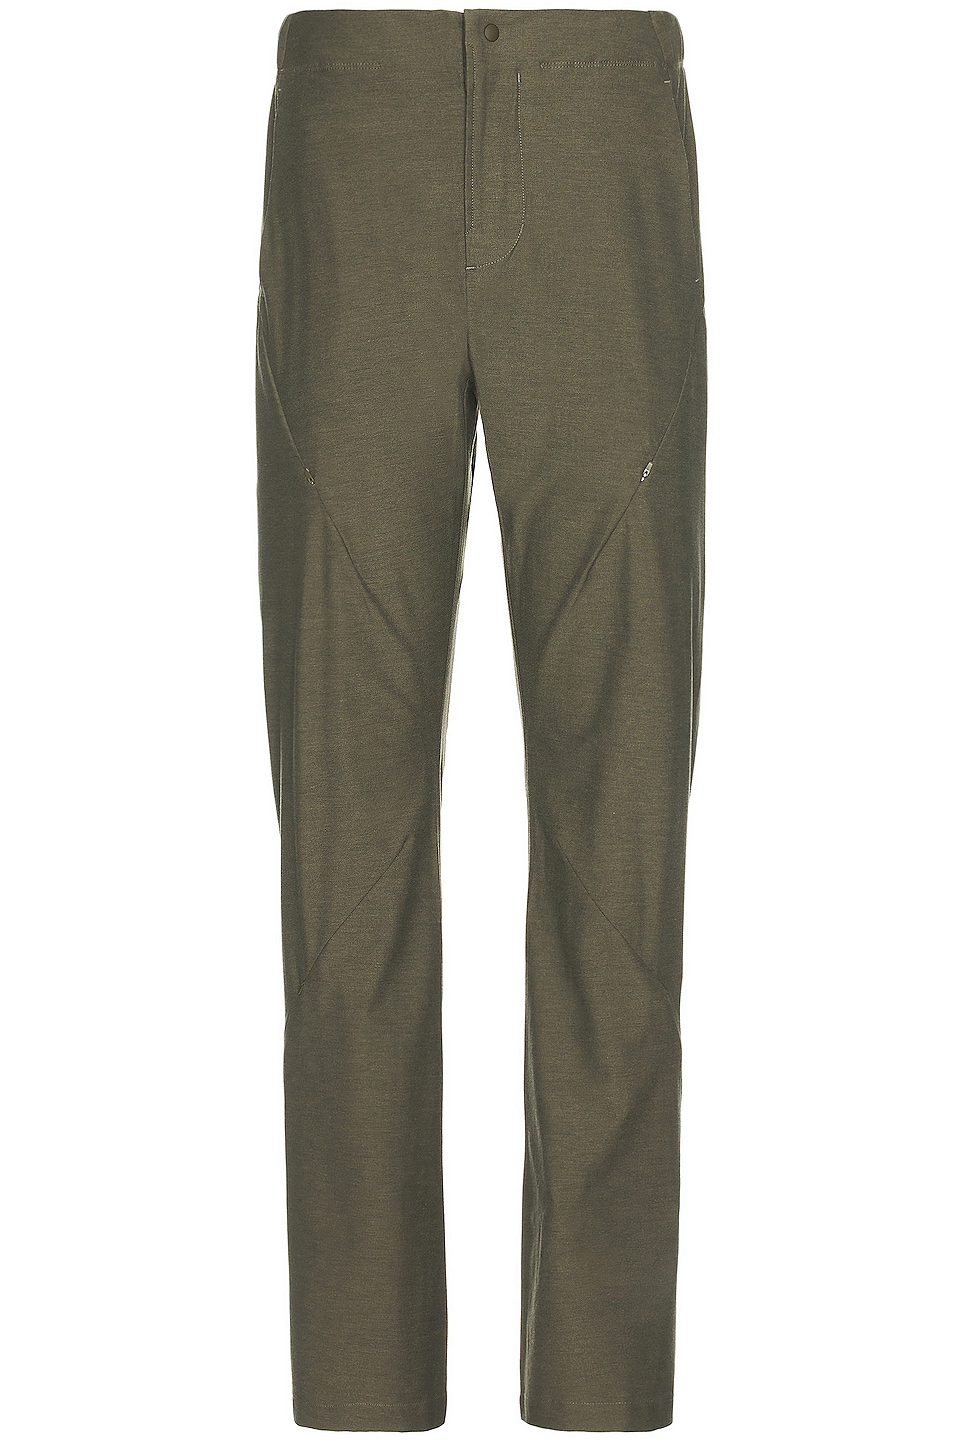 Image 1 of POST ARCHIVE FACTION (PAF) 5.1 Technical Pants Right based On The 5.0+ Technical Pants in OLIVE GREEN